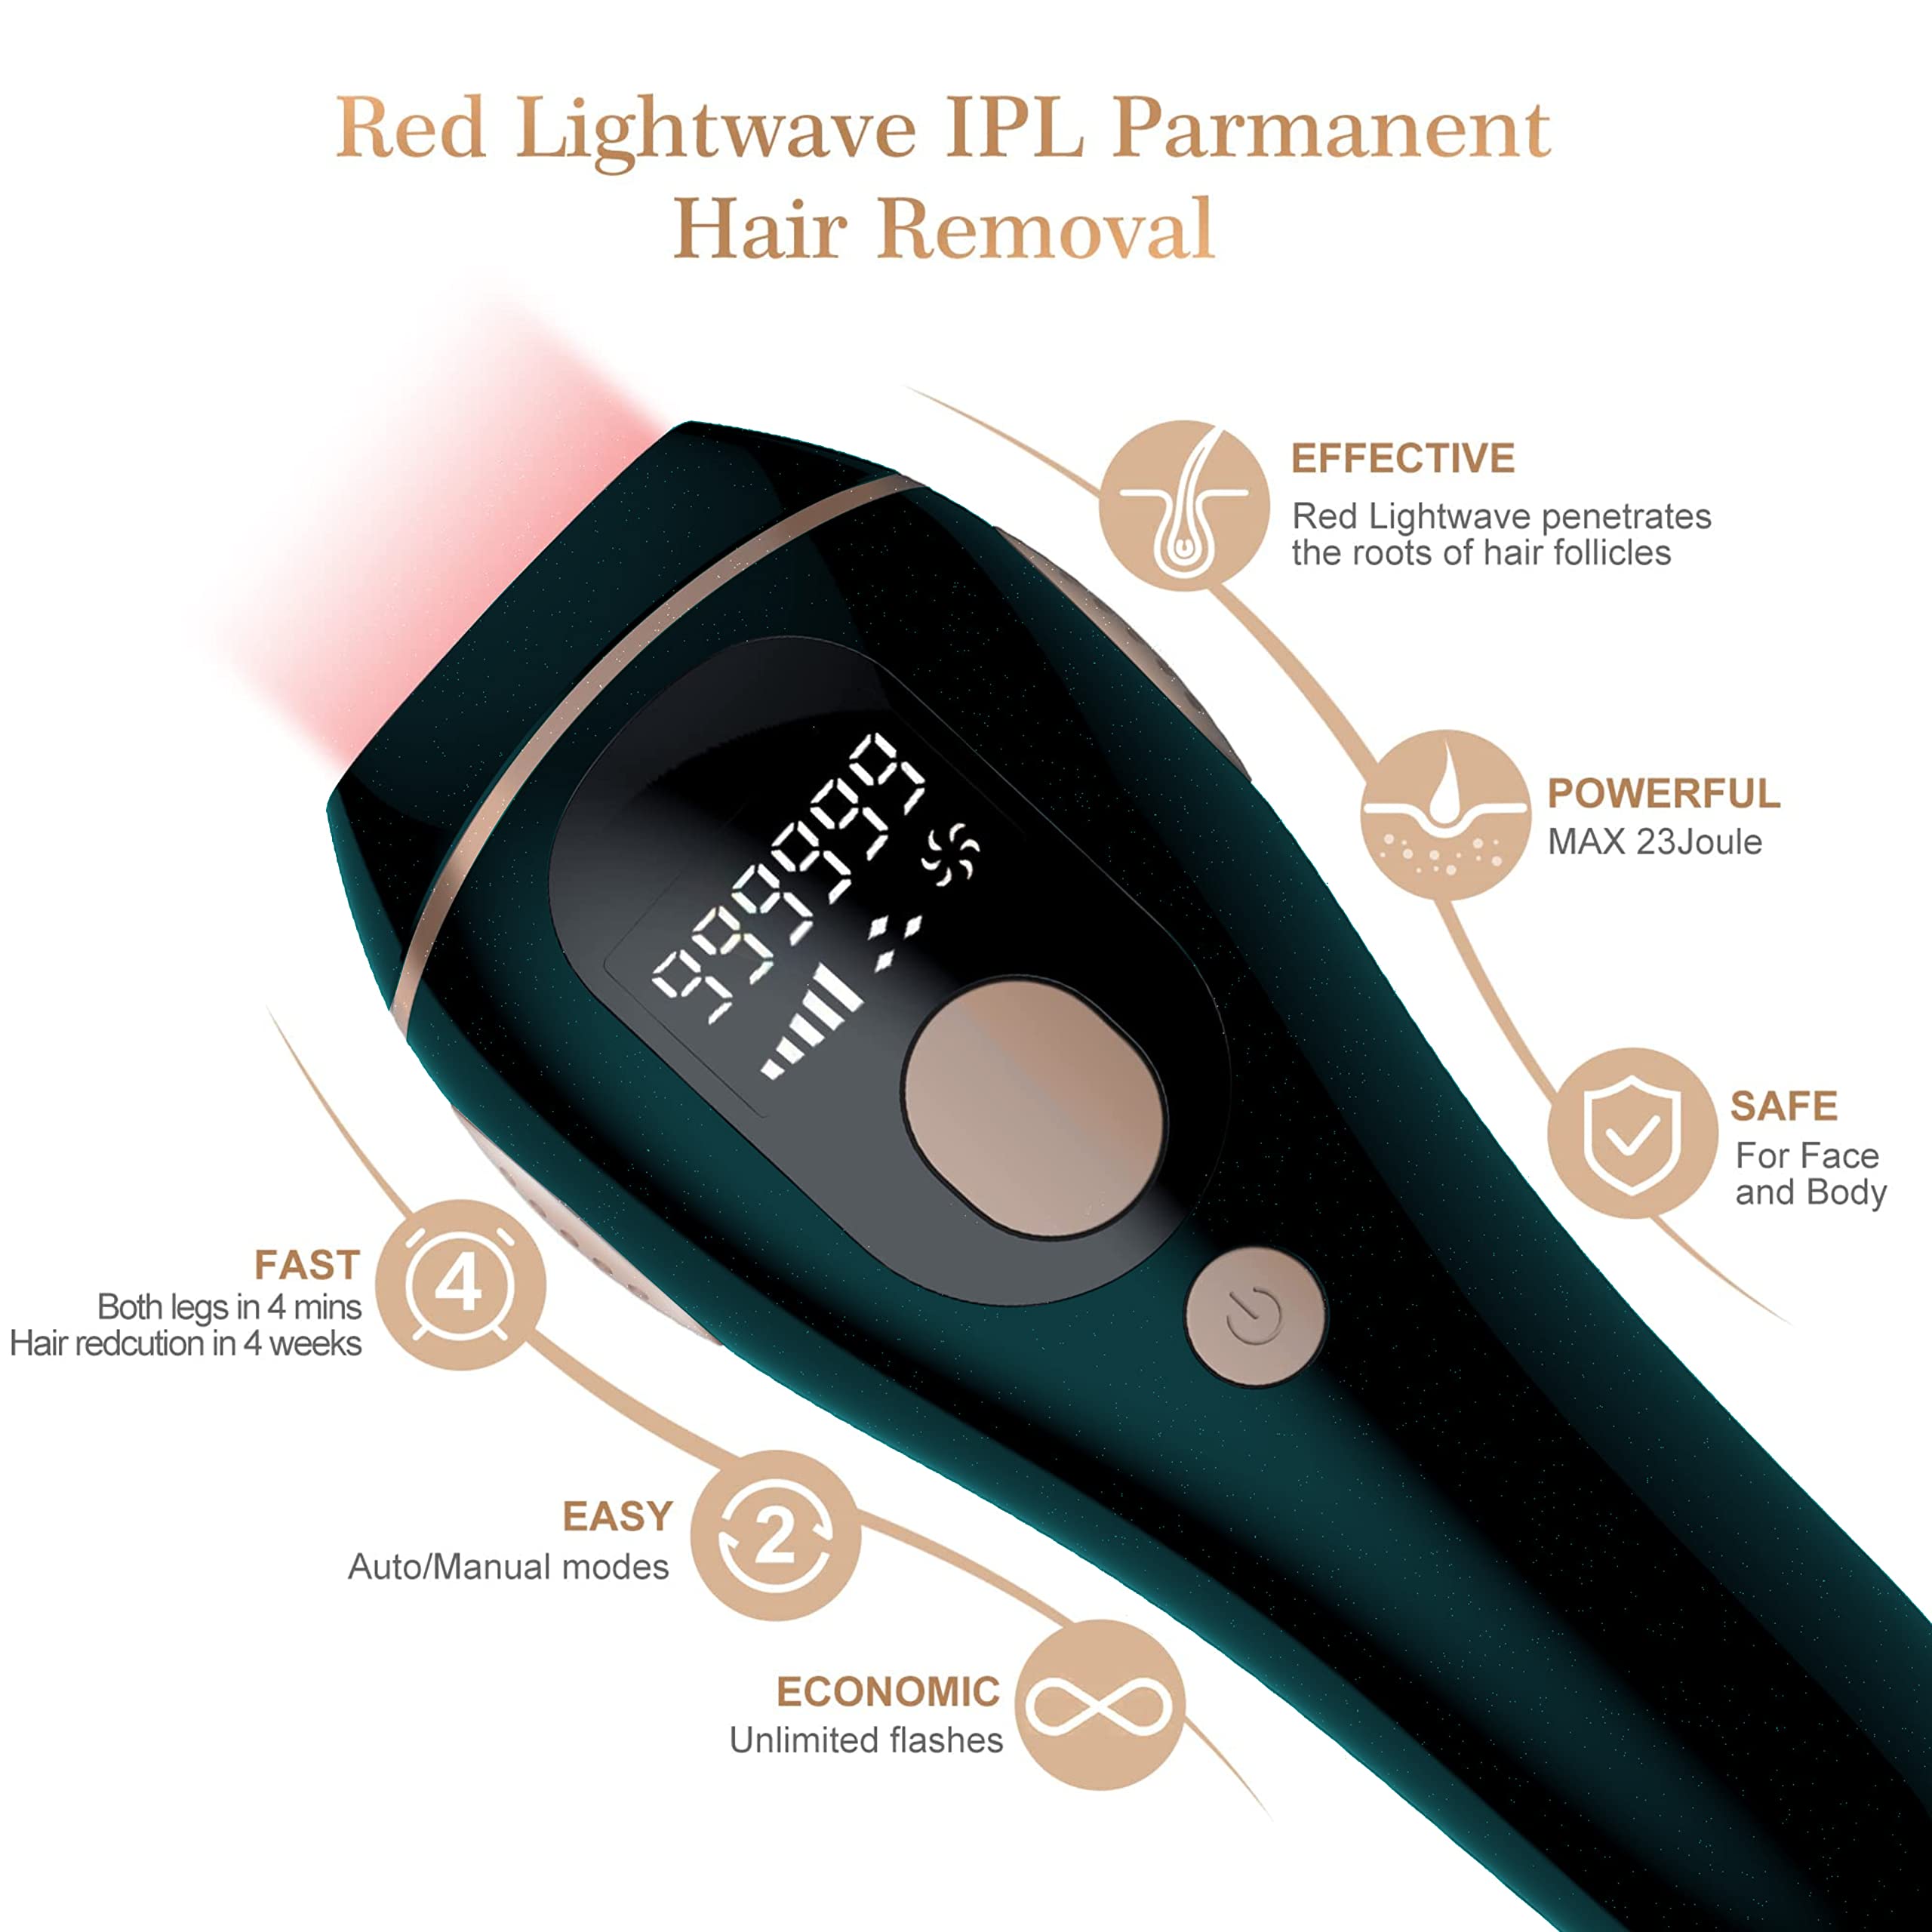 Enthsush IPL Laser Hair Removal for Women and Men at-Home,Permanent Hair Removal, 999,000 Flashes Photo-epilator , Painless Hair Remover,Facial Hair Removal Device for Armpits Legs Arms Bikini Line